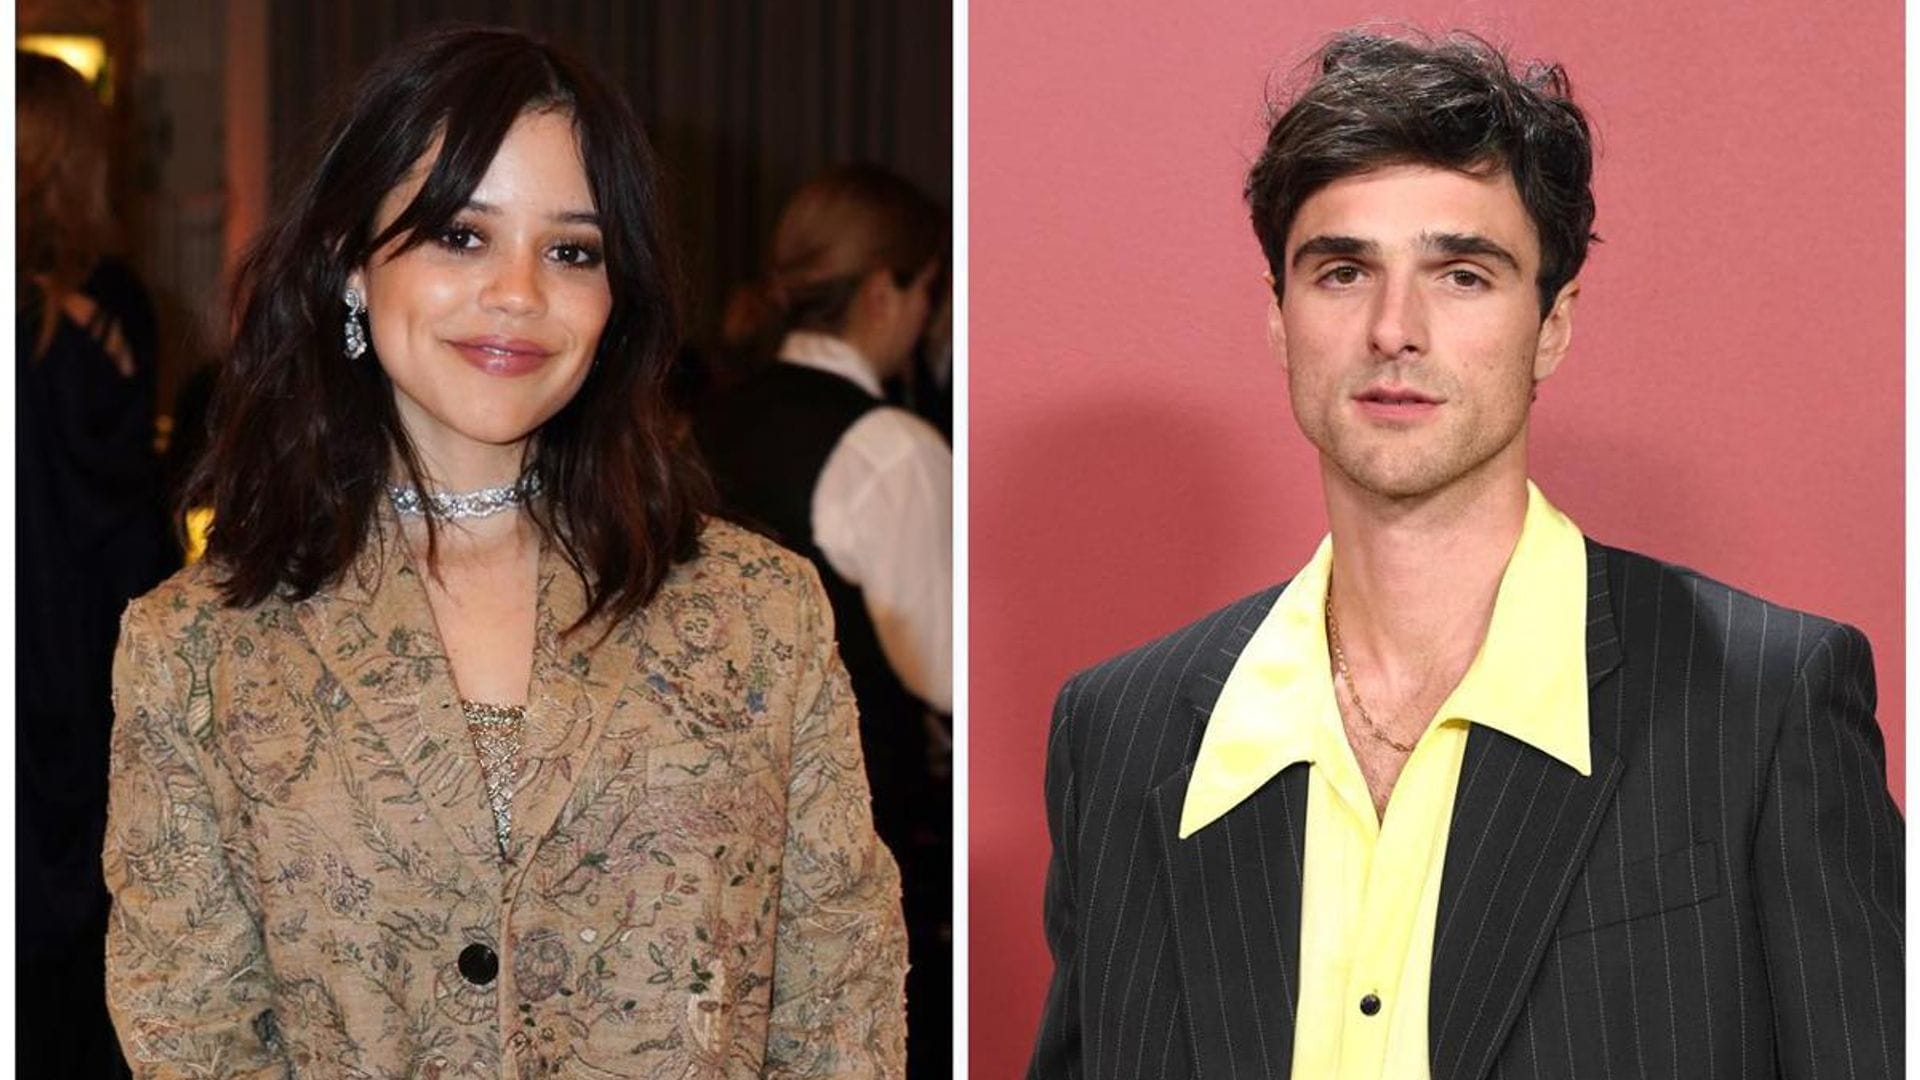 Jenna Ortega and Jacob Elordi are prospects for an unconfirmed ‘Twilight’ reboot